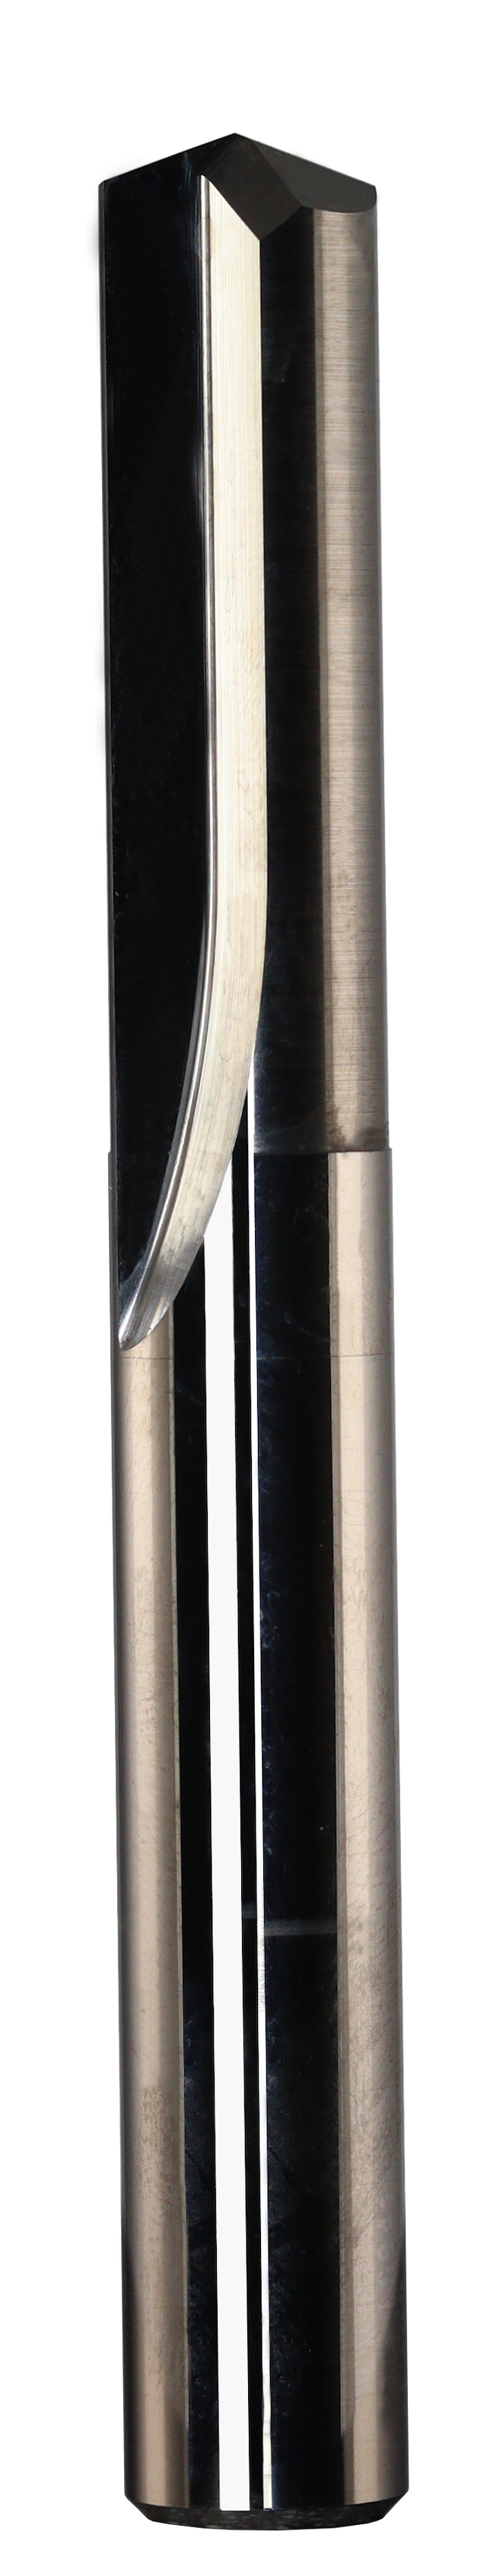 29/64" Dia, 140 Degree Point, Solid Carbide Drill - 56129